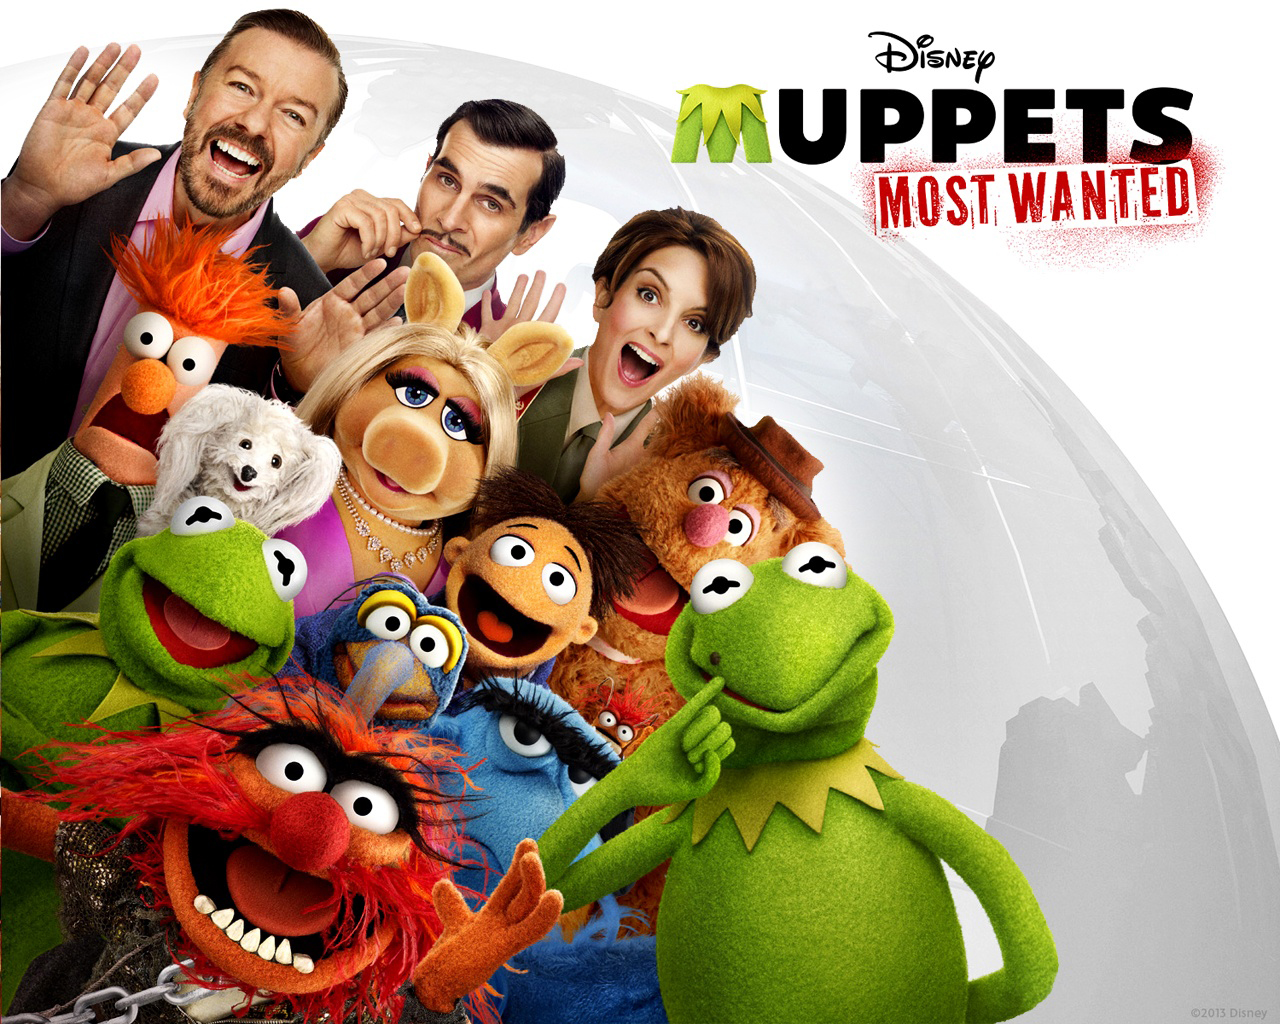 Muppets most wanted header